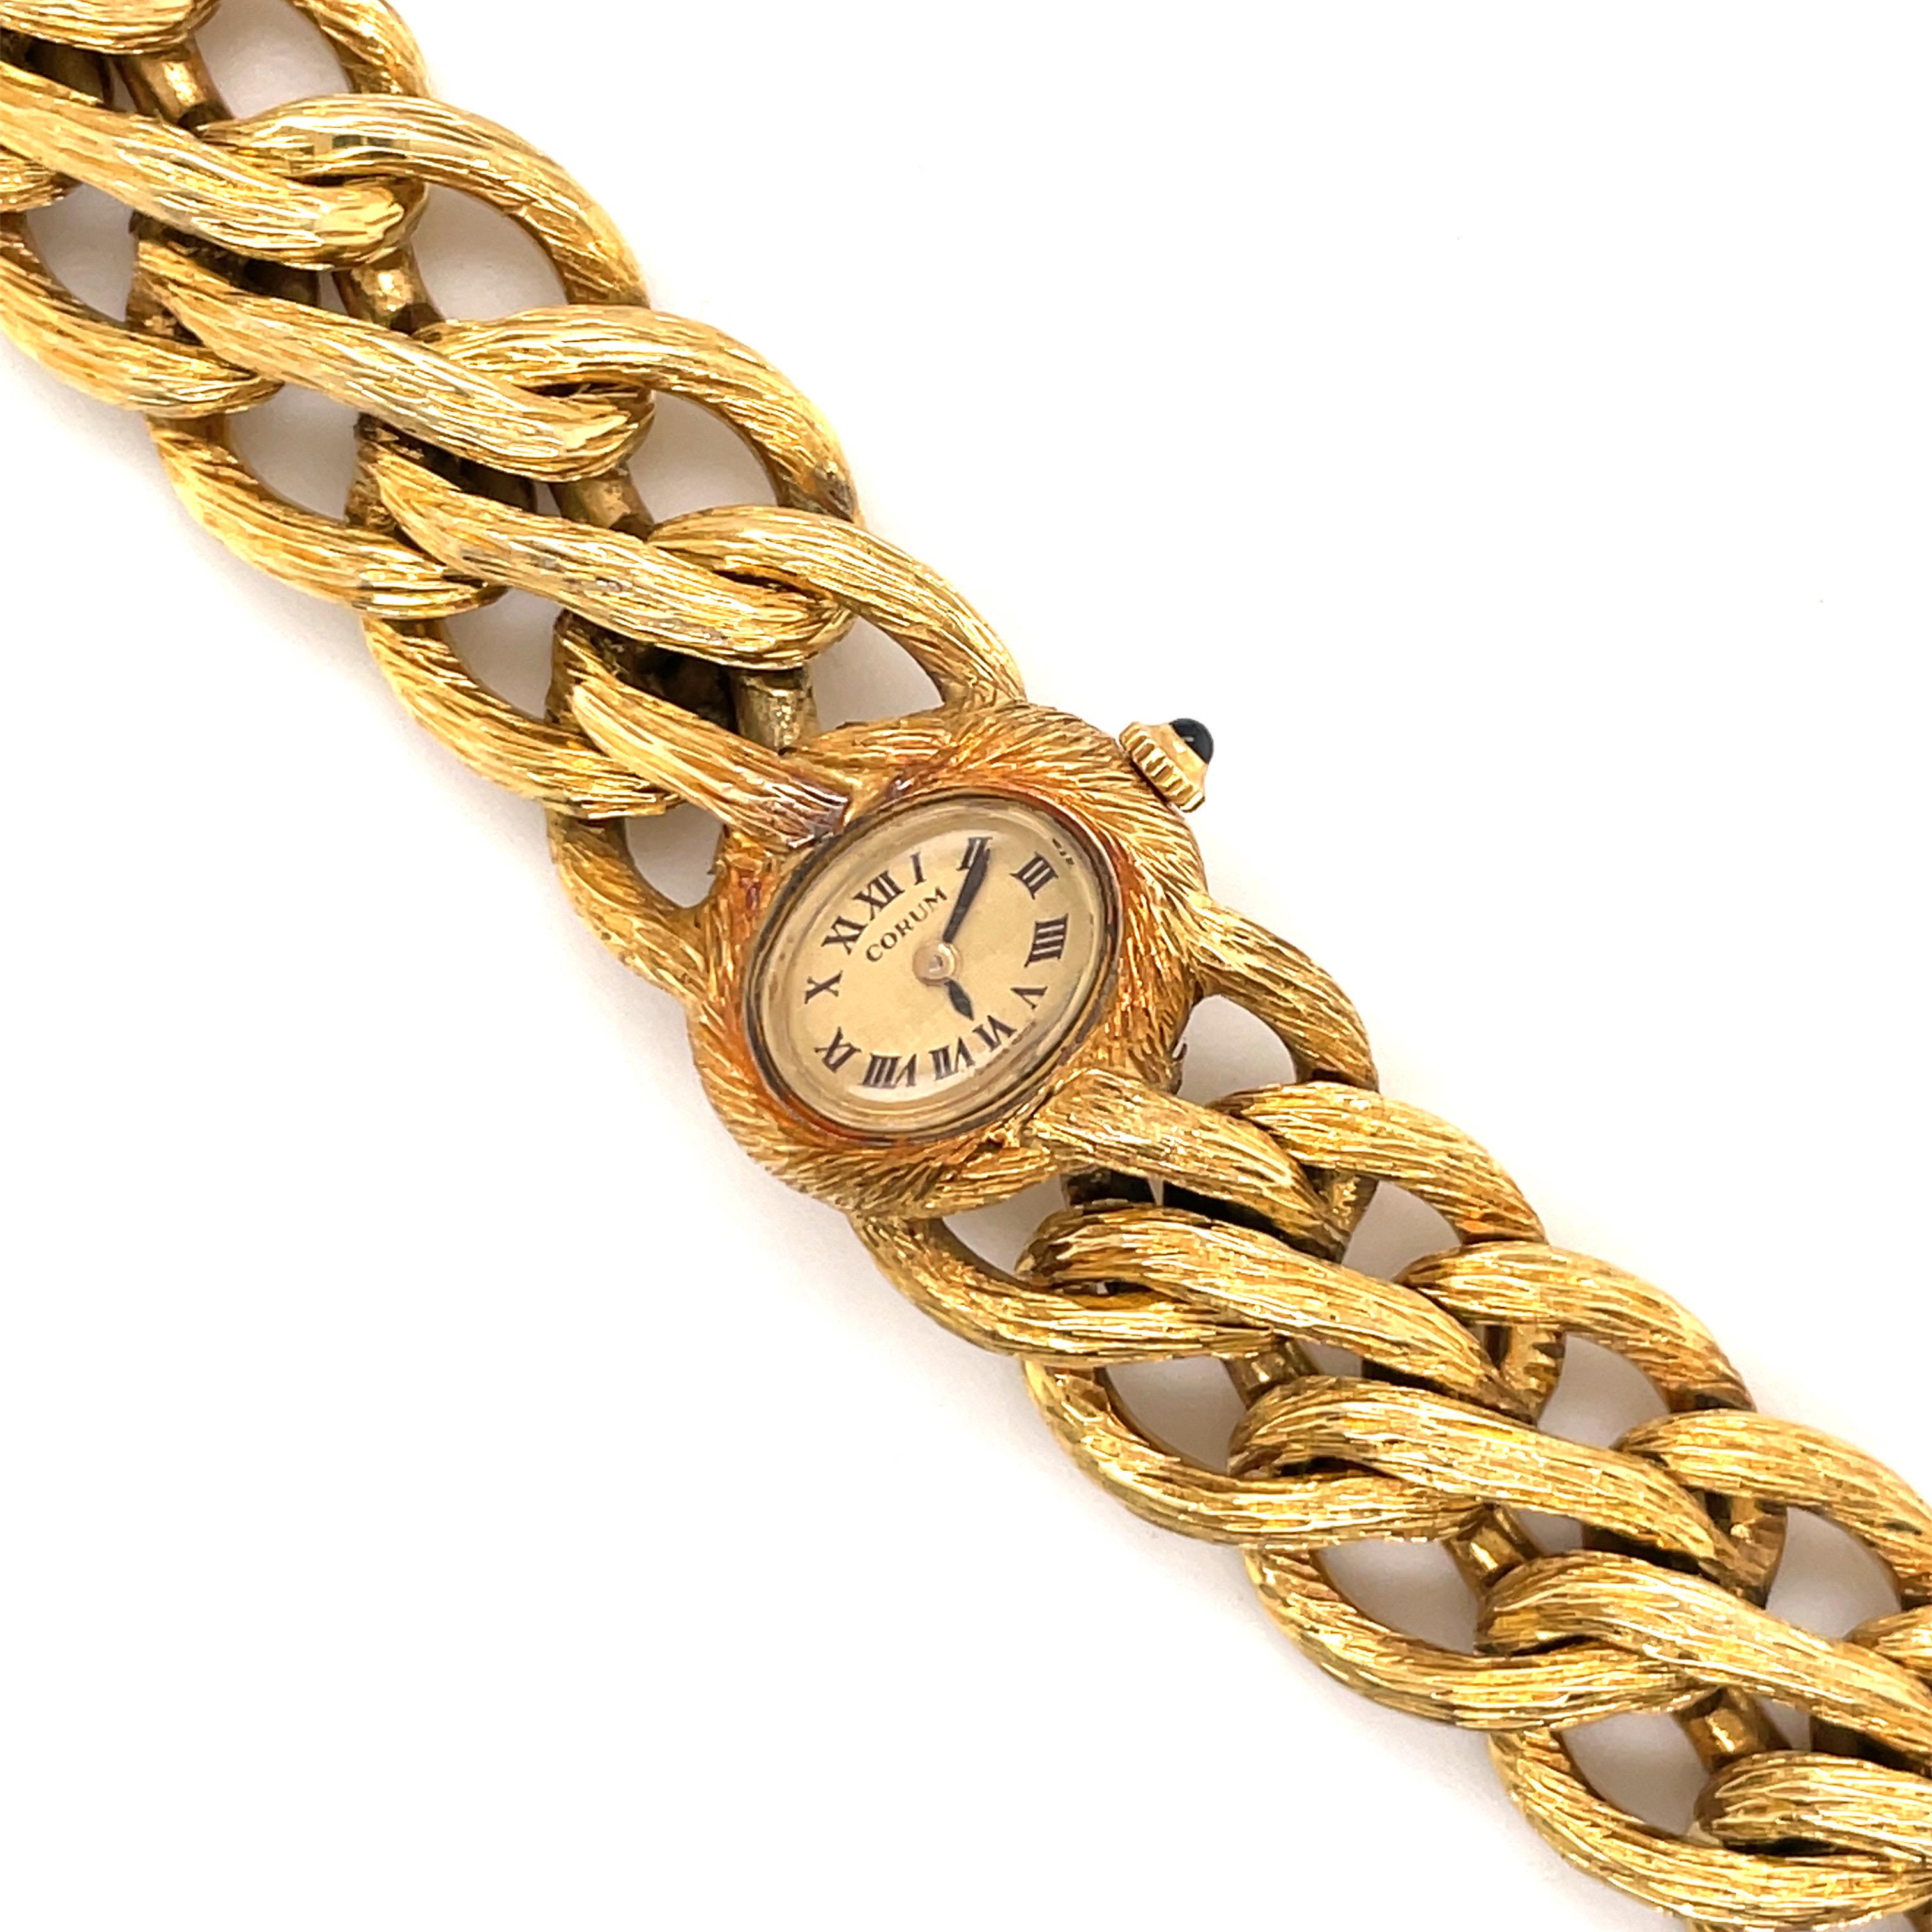 18 Karat Yellow Gold wristwatch featuring an oval shape dial by Corum with a 12 hour dial on a Gay Frères signature braided bracelet. 
Case: 19mm
Movement: Mechanical, Hand-Winding
Working Condition

Gay Frères was founded by Jean-Pierre Gay and